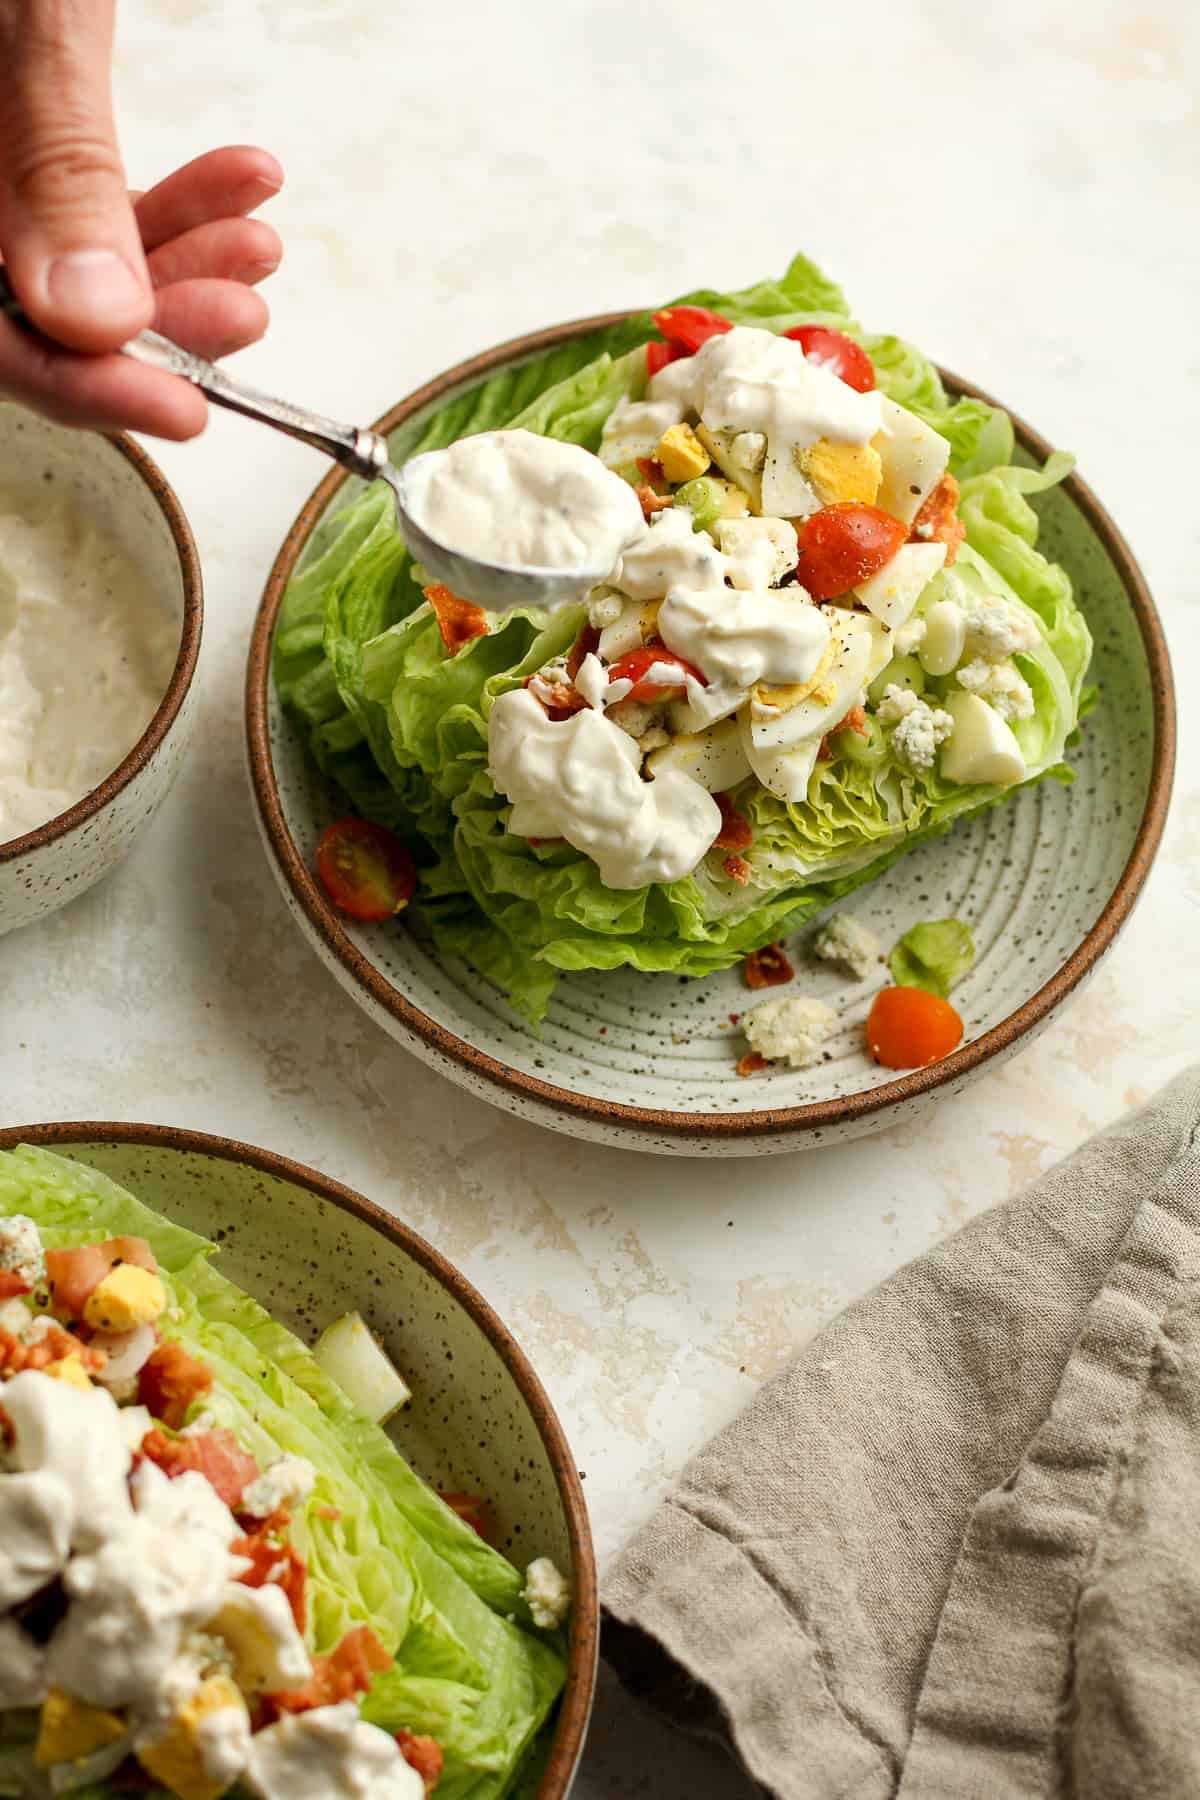 A spoon of blue cheese dressing being added to wedge salad.